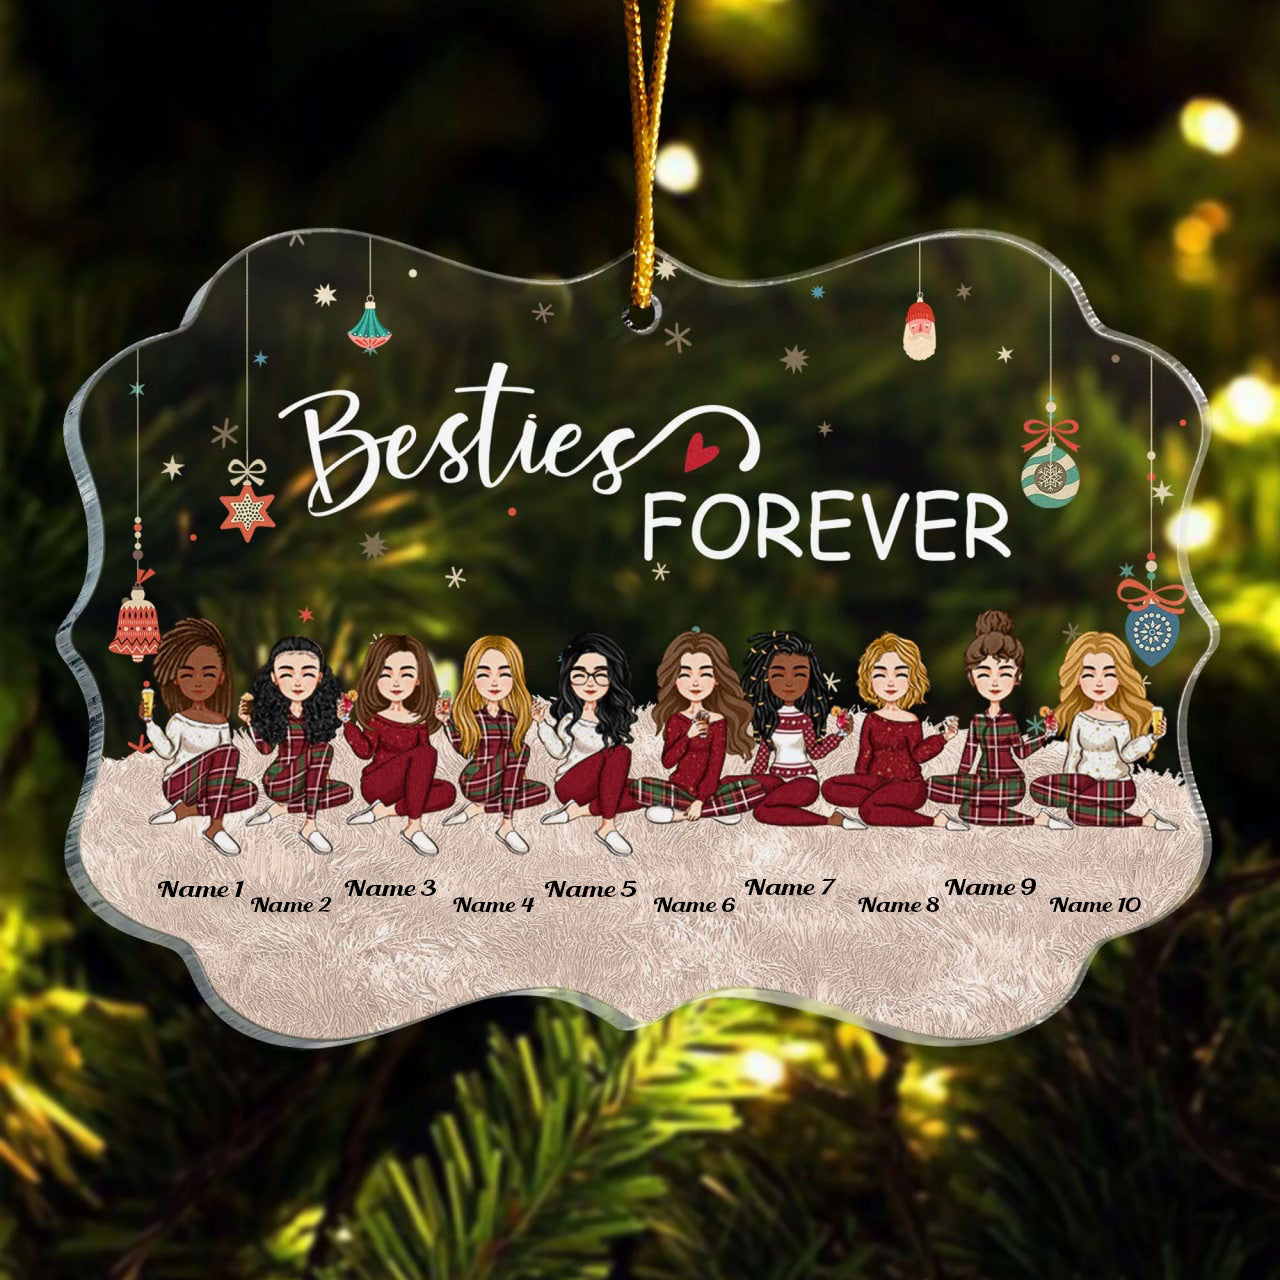 Besties Forever - Personalized Circle Acrylic Ornament - Christmas, New Year Gift For Sistas, Sister, Besties, Best Friends, Soul Sisters